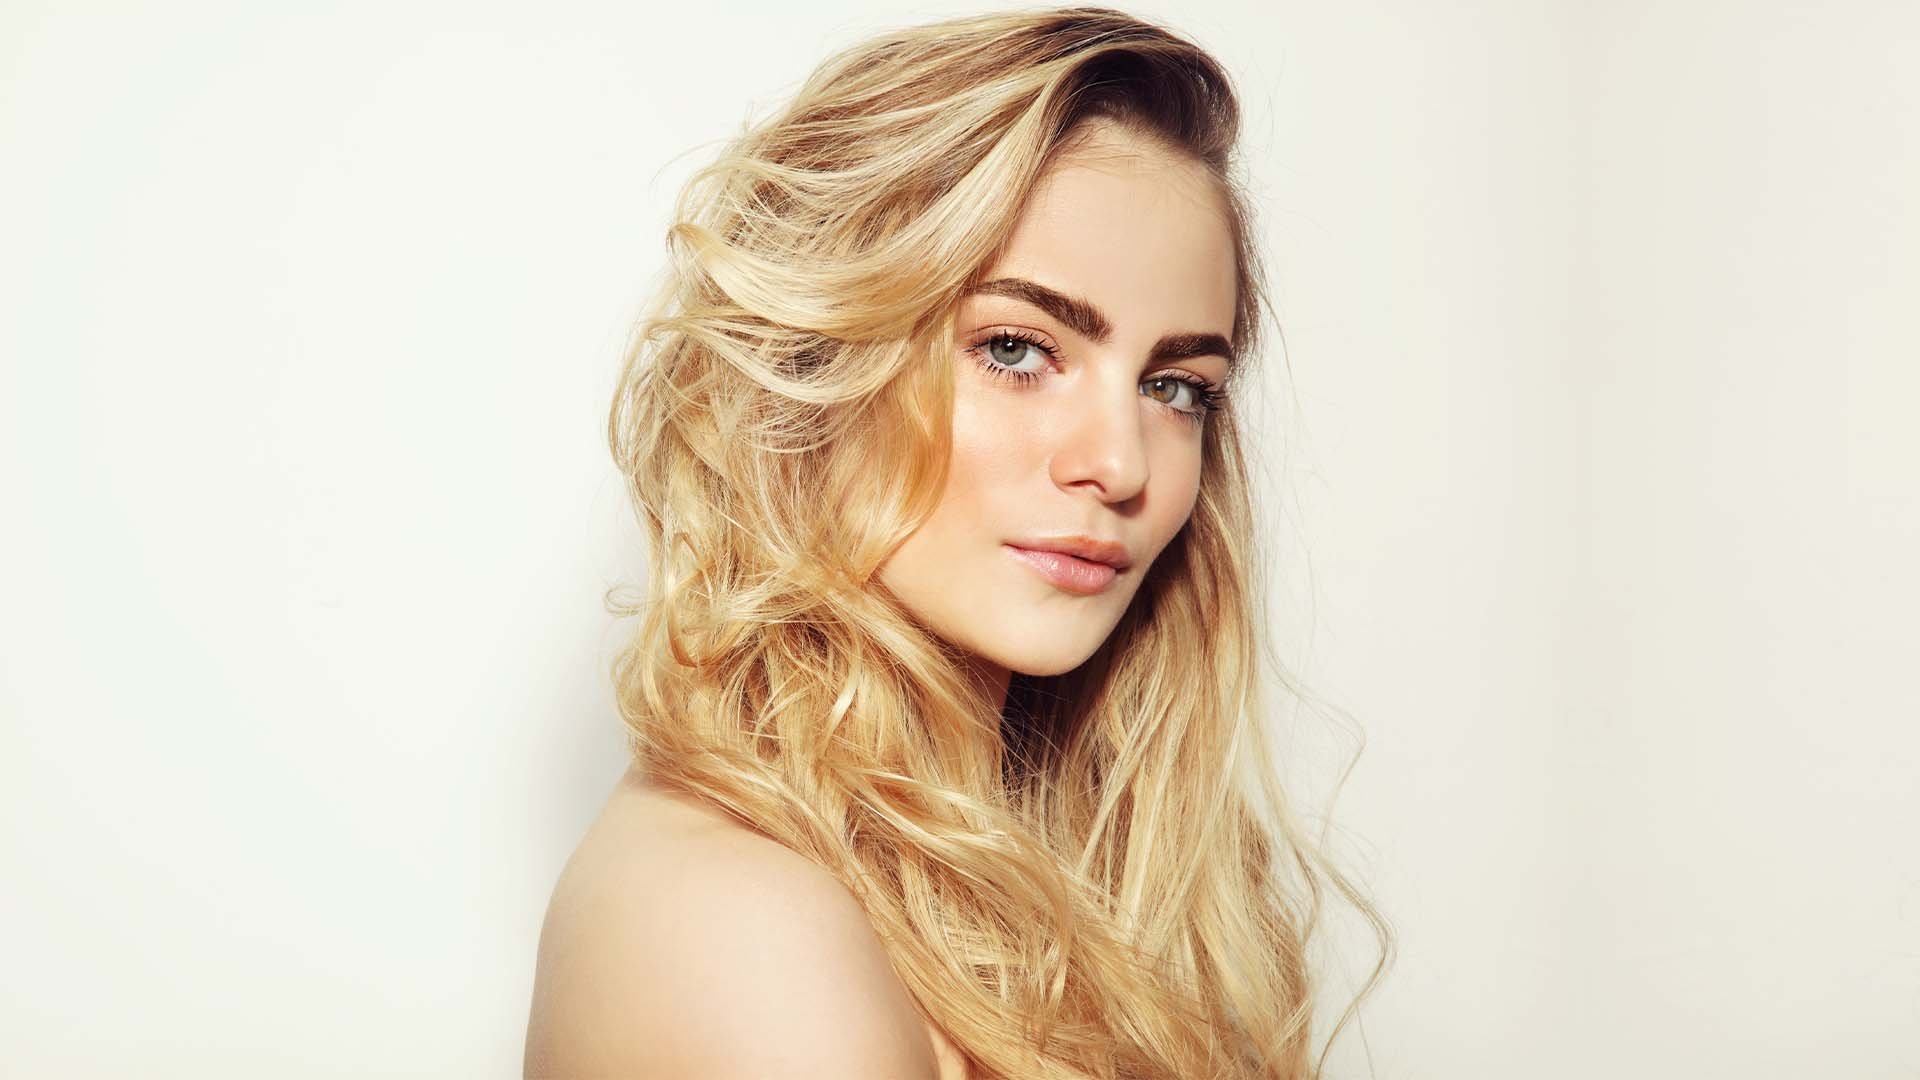 Loreal Paris Article How To Get Buttery Blonde Hair As Your Next Color D